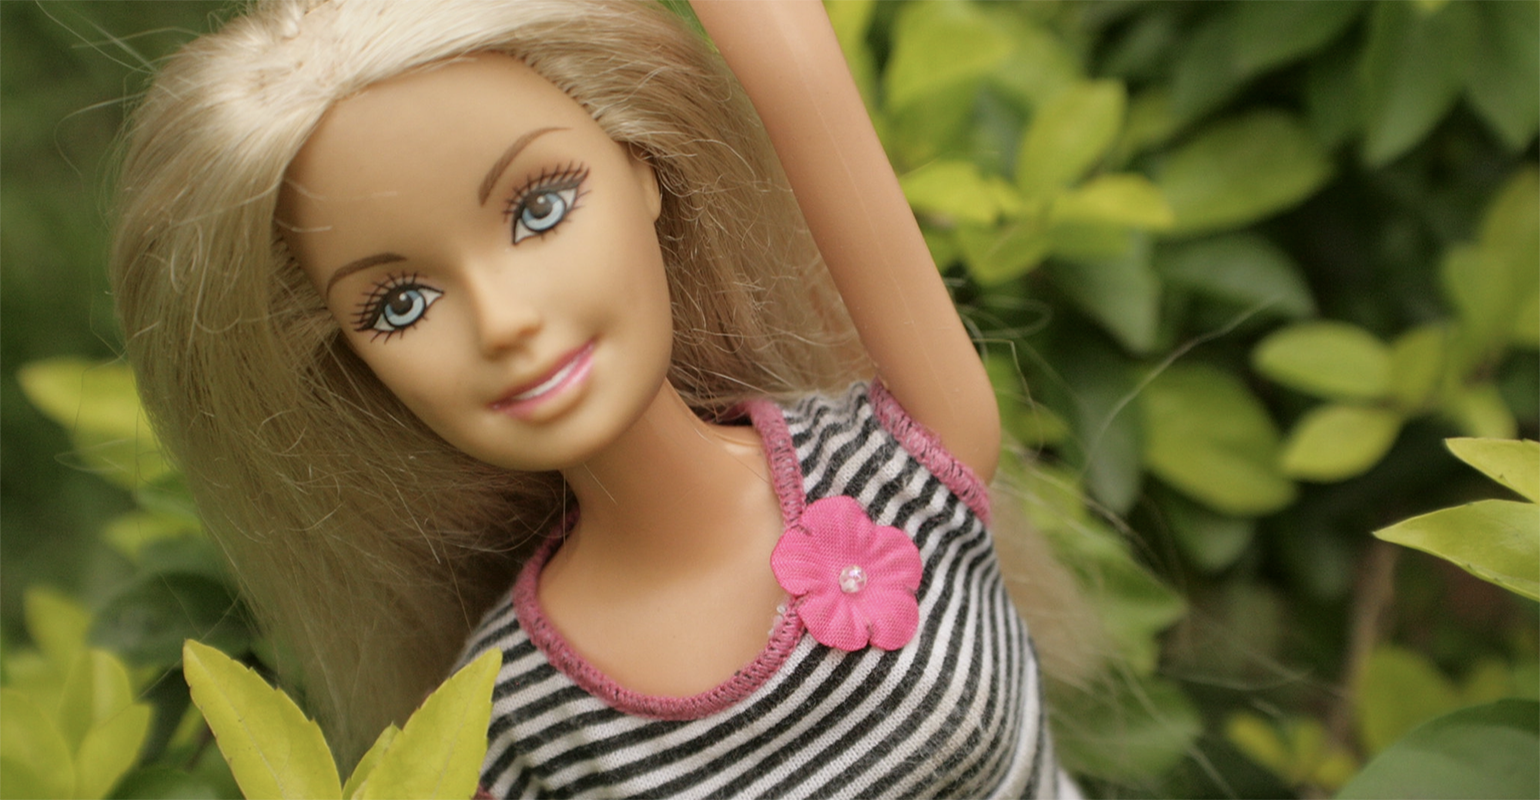 How was Barbie created?